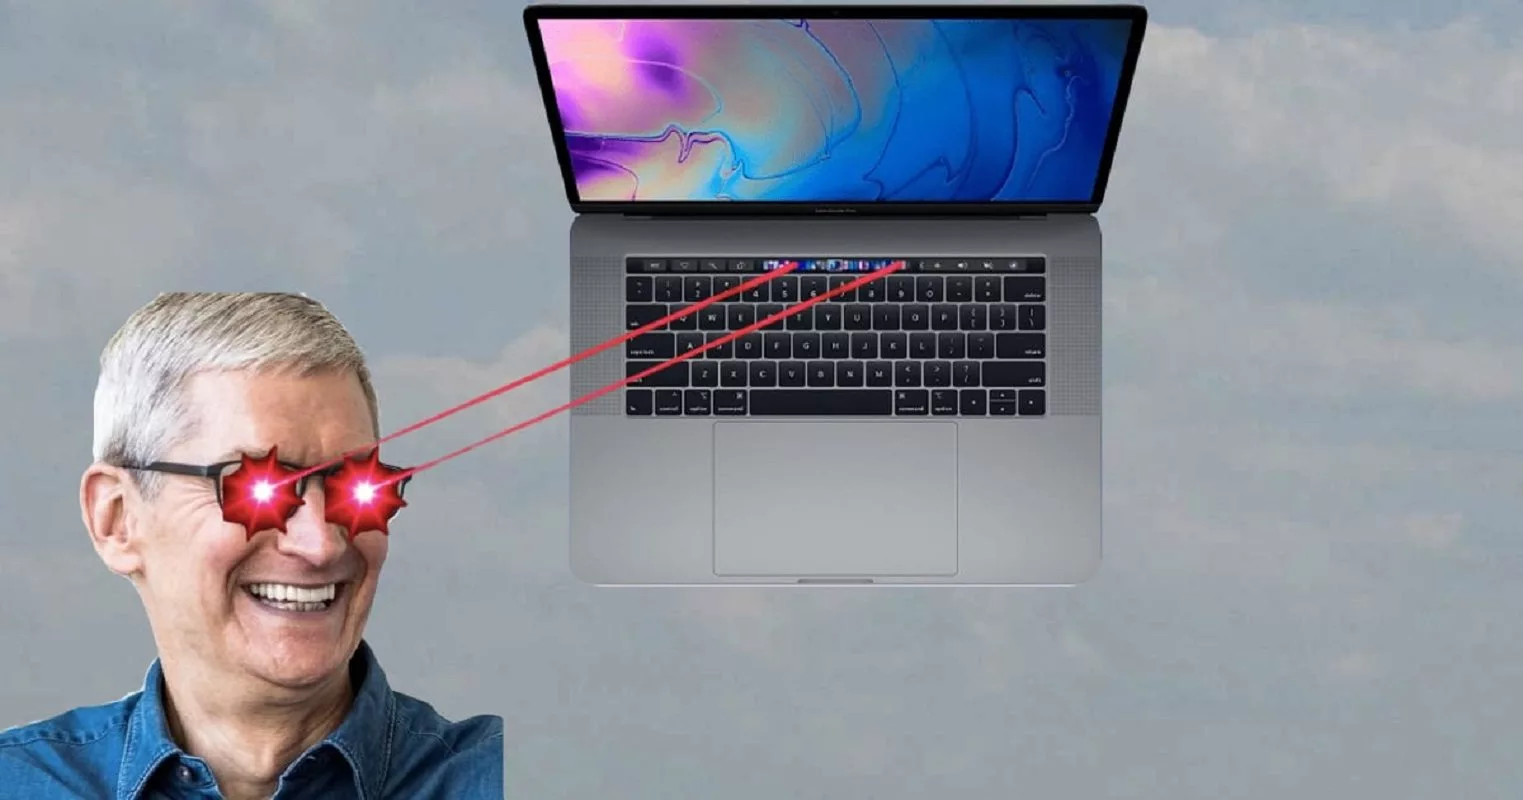 Apple is discontinuing the 13-inch MacBook Pro with Touch Bar, a feature that has been controversial since it was introduced in 2016